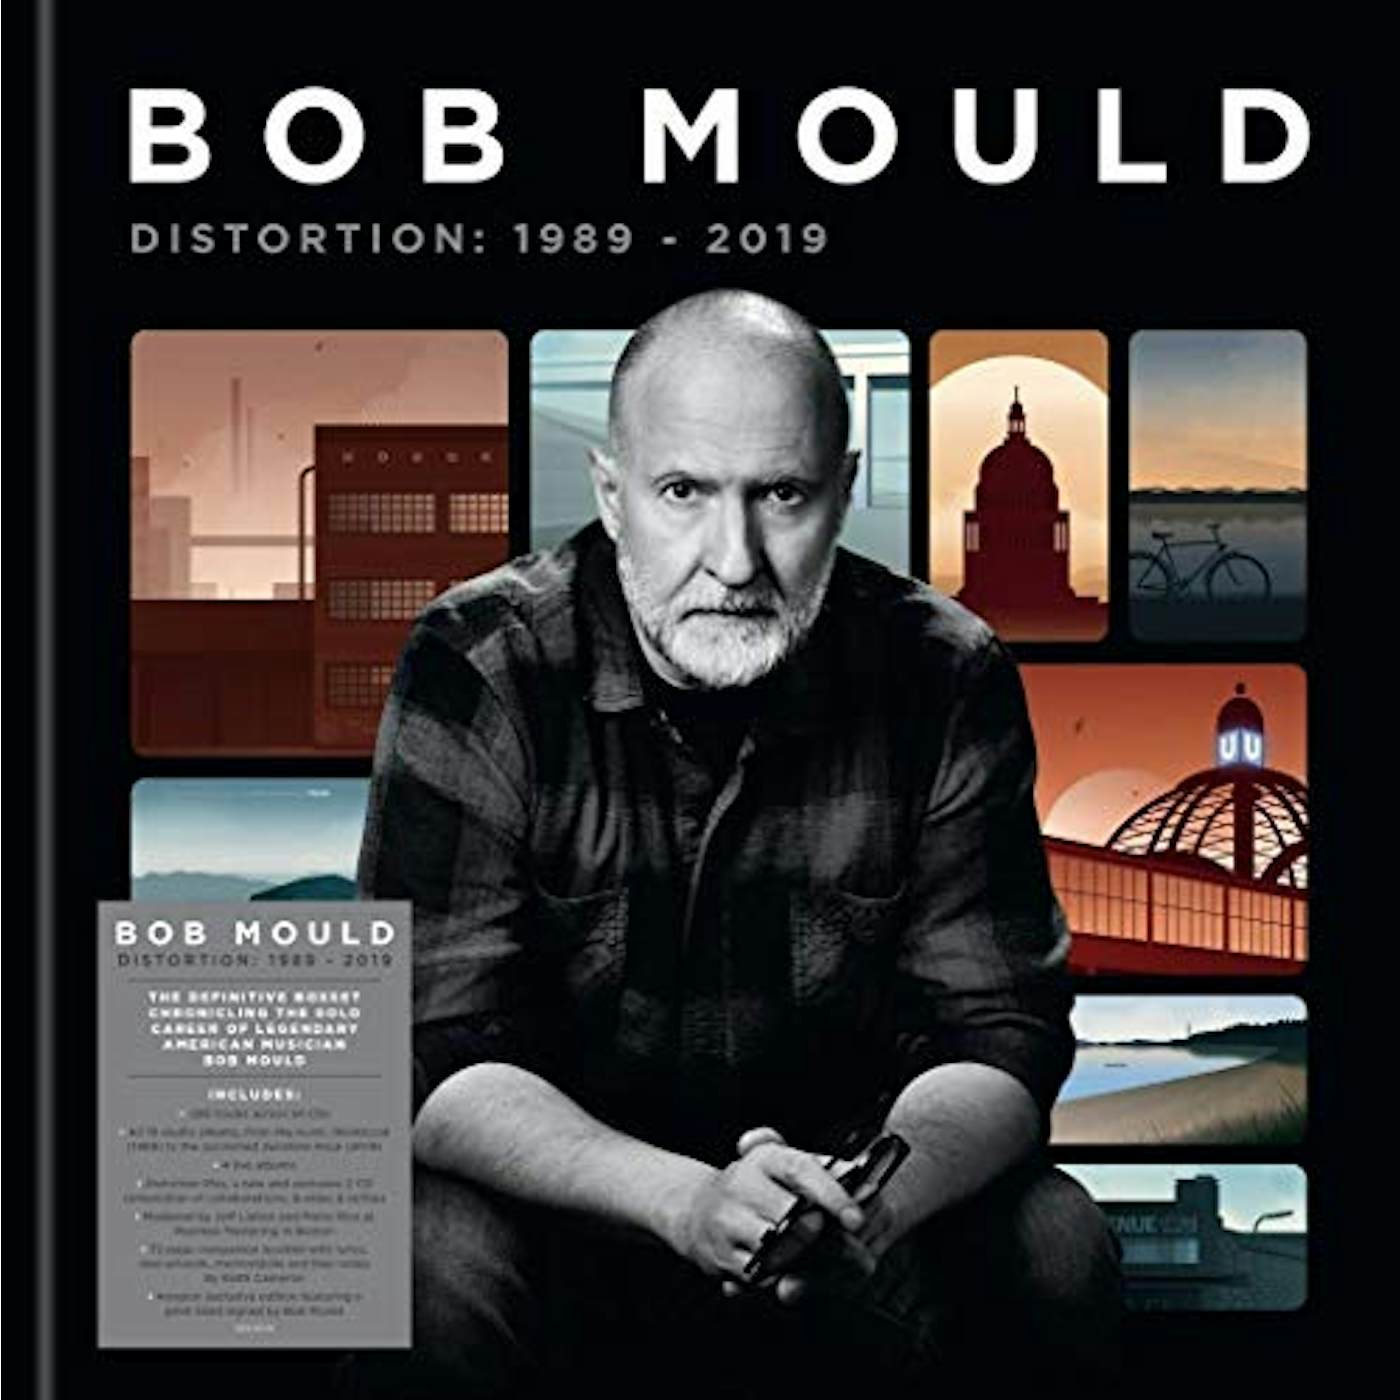 Bob Mould DISTORTION: THE BEST OF 1989-2019 (2LP/140G) Vinyl Record